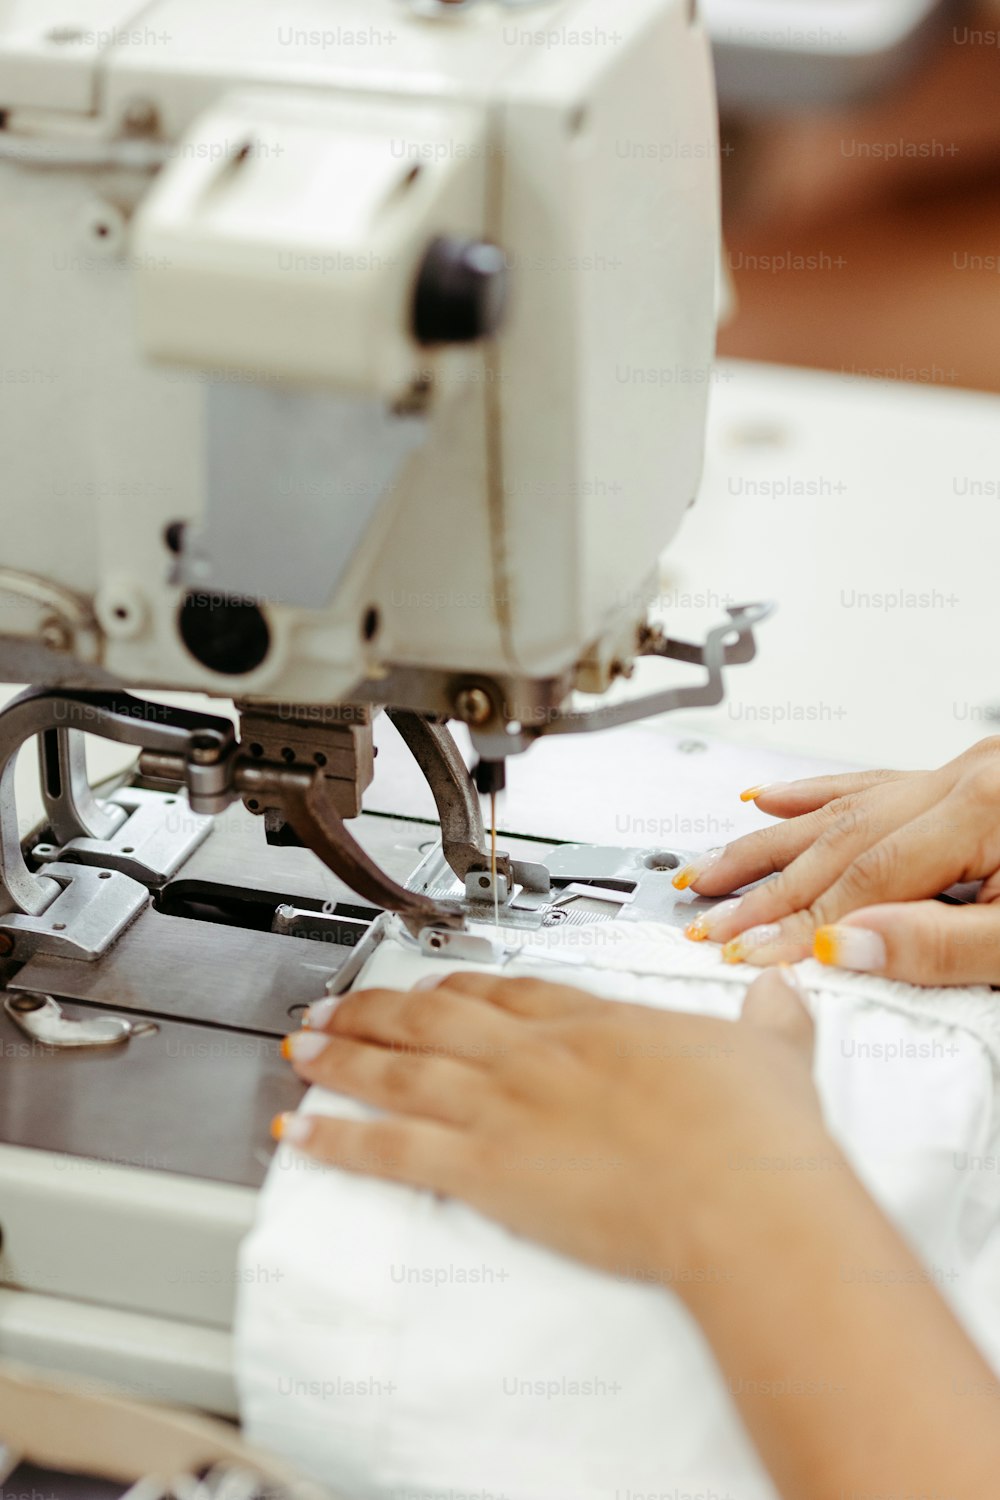 a woman is working on a sewing machine